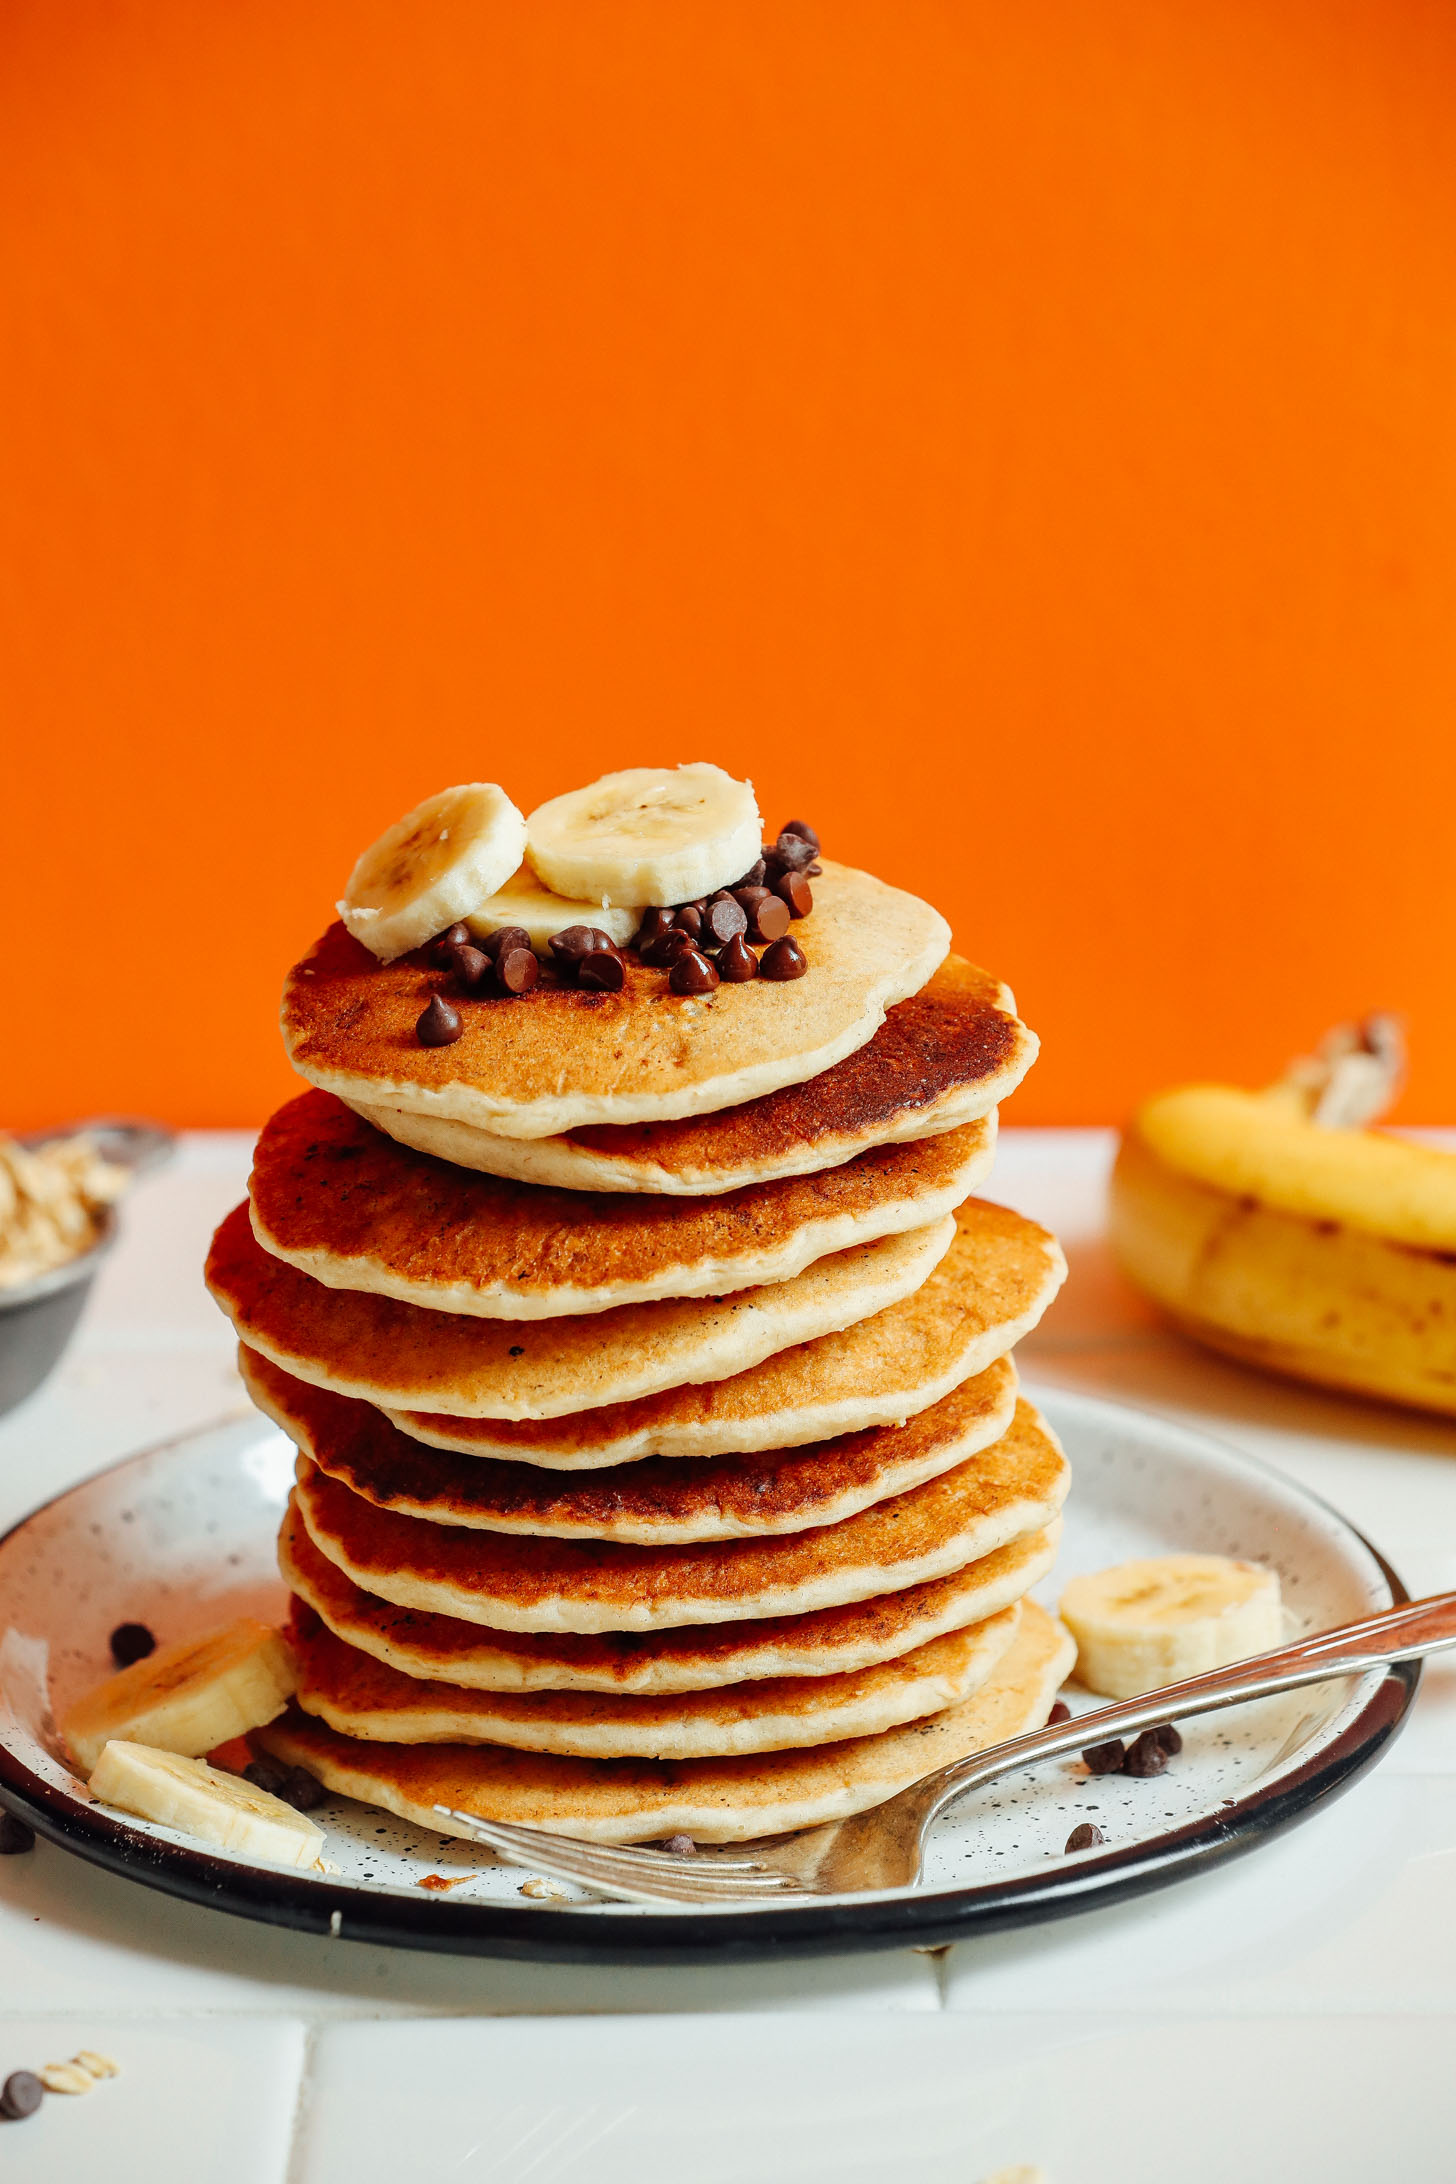 Stack of our delicious vegan banana oat pancakes recipe